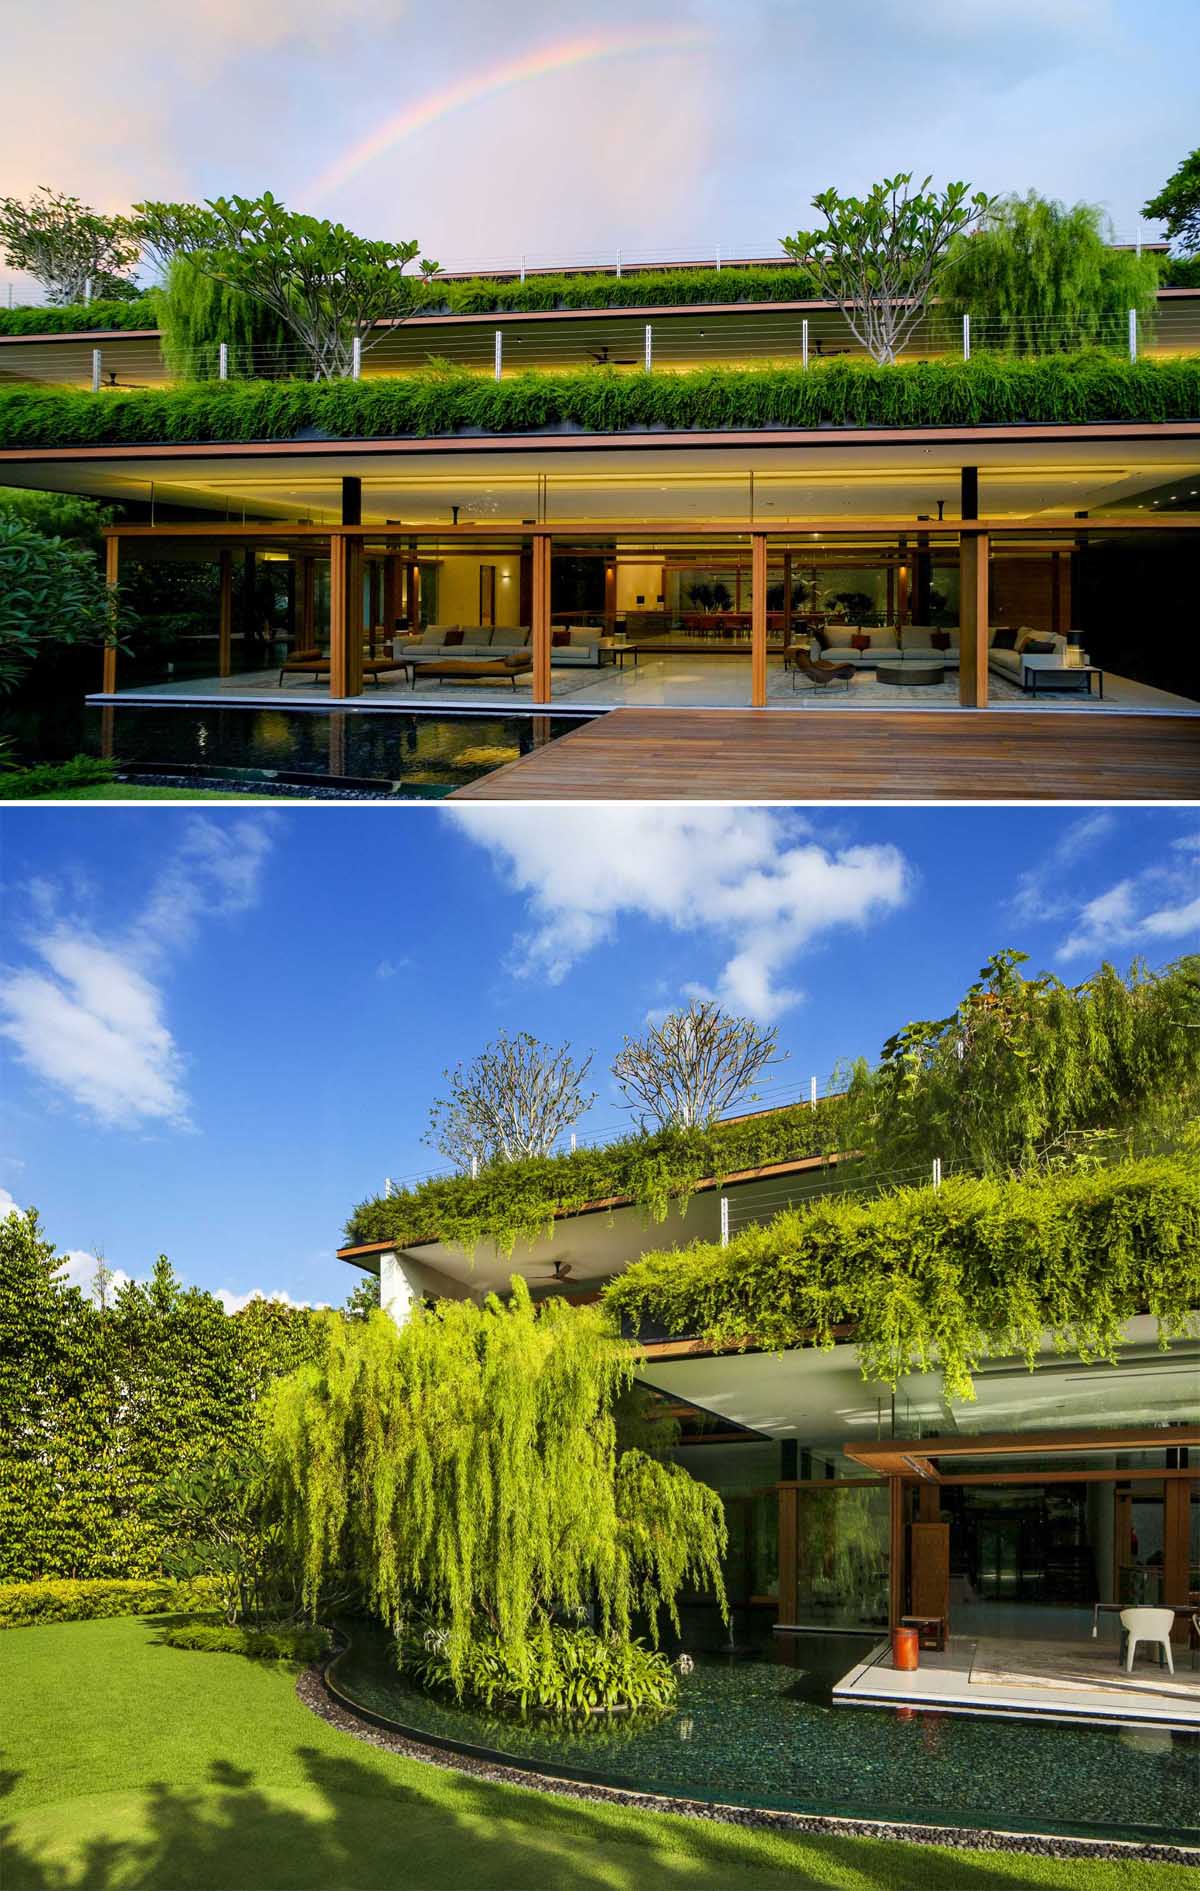 This modern home, which has multiple levels, includes lush gardens that flow over the edges of the roofs.